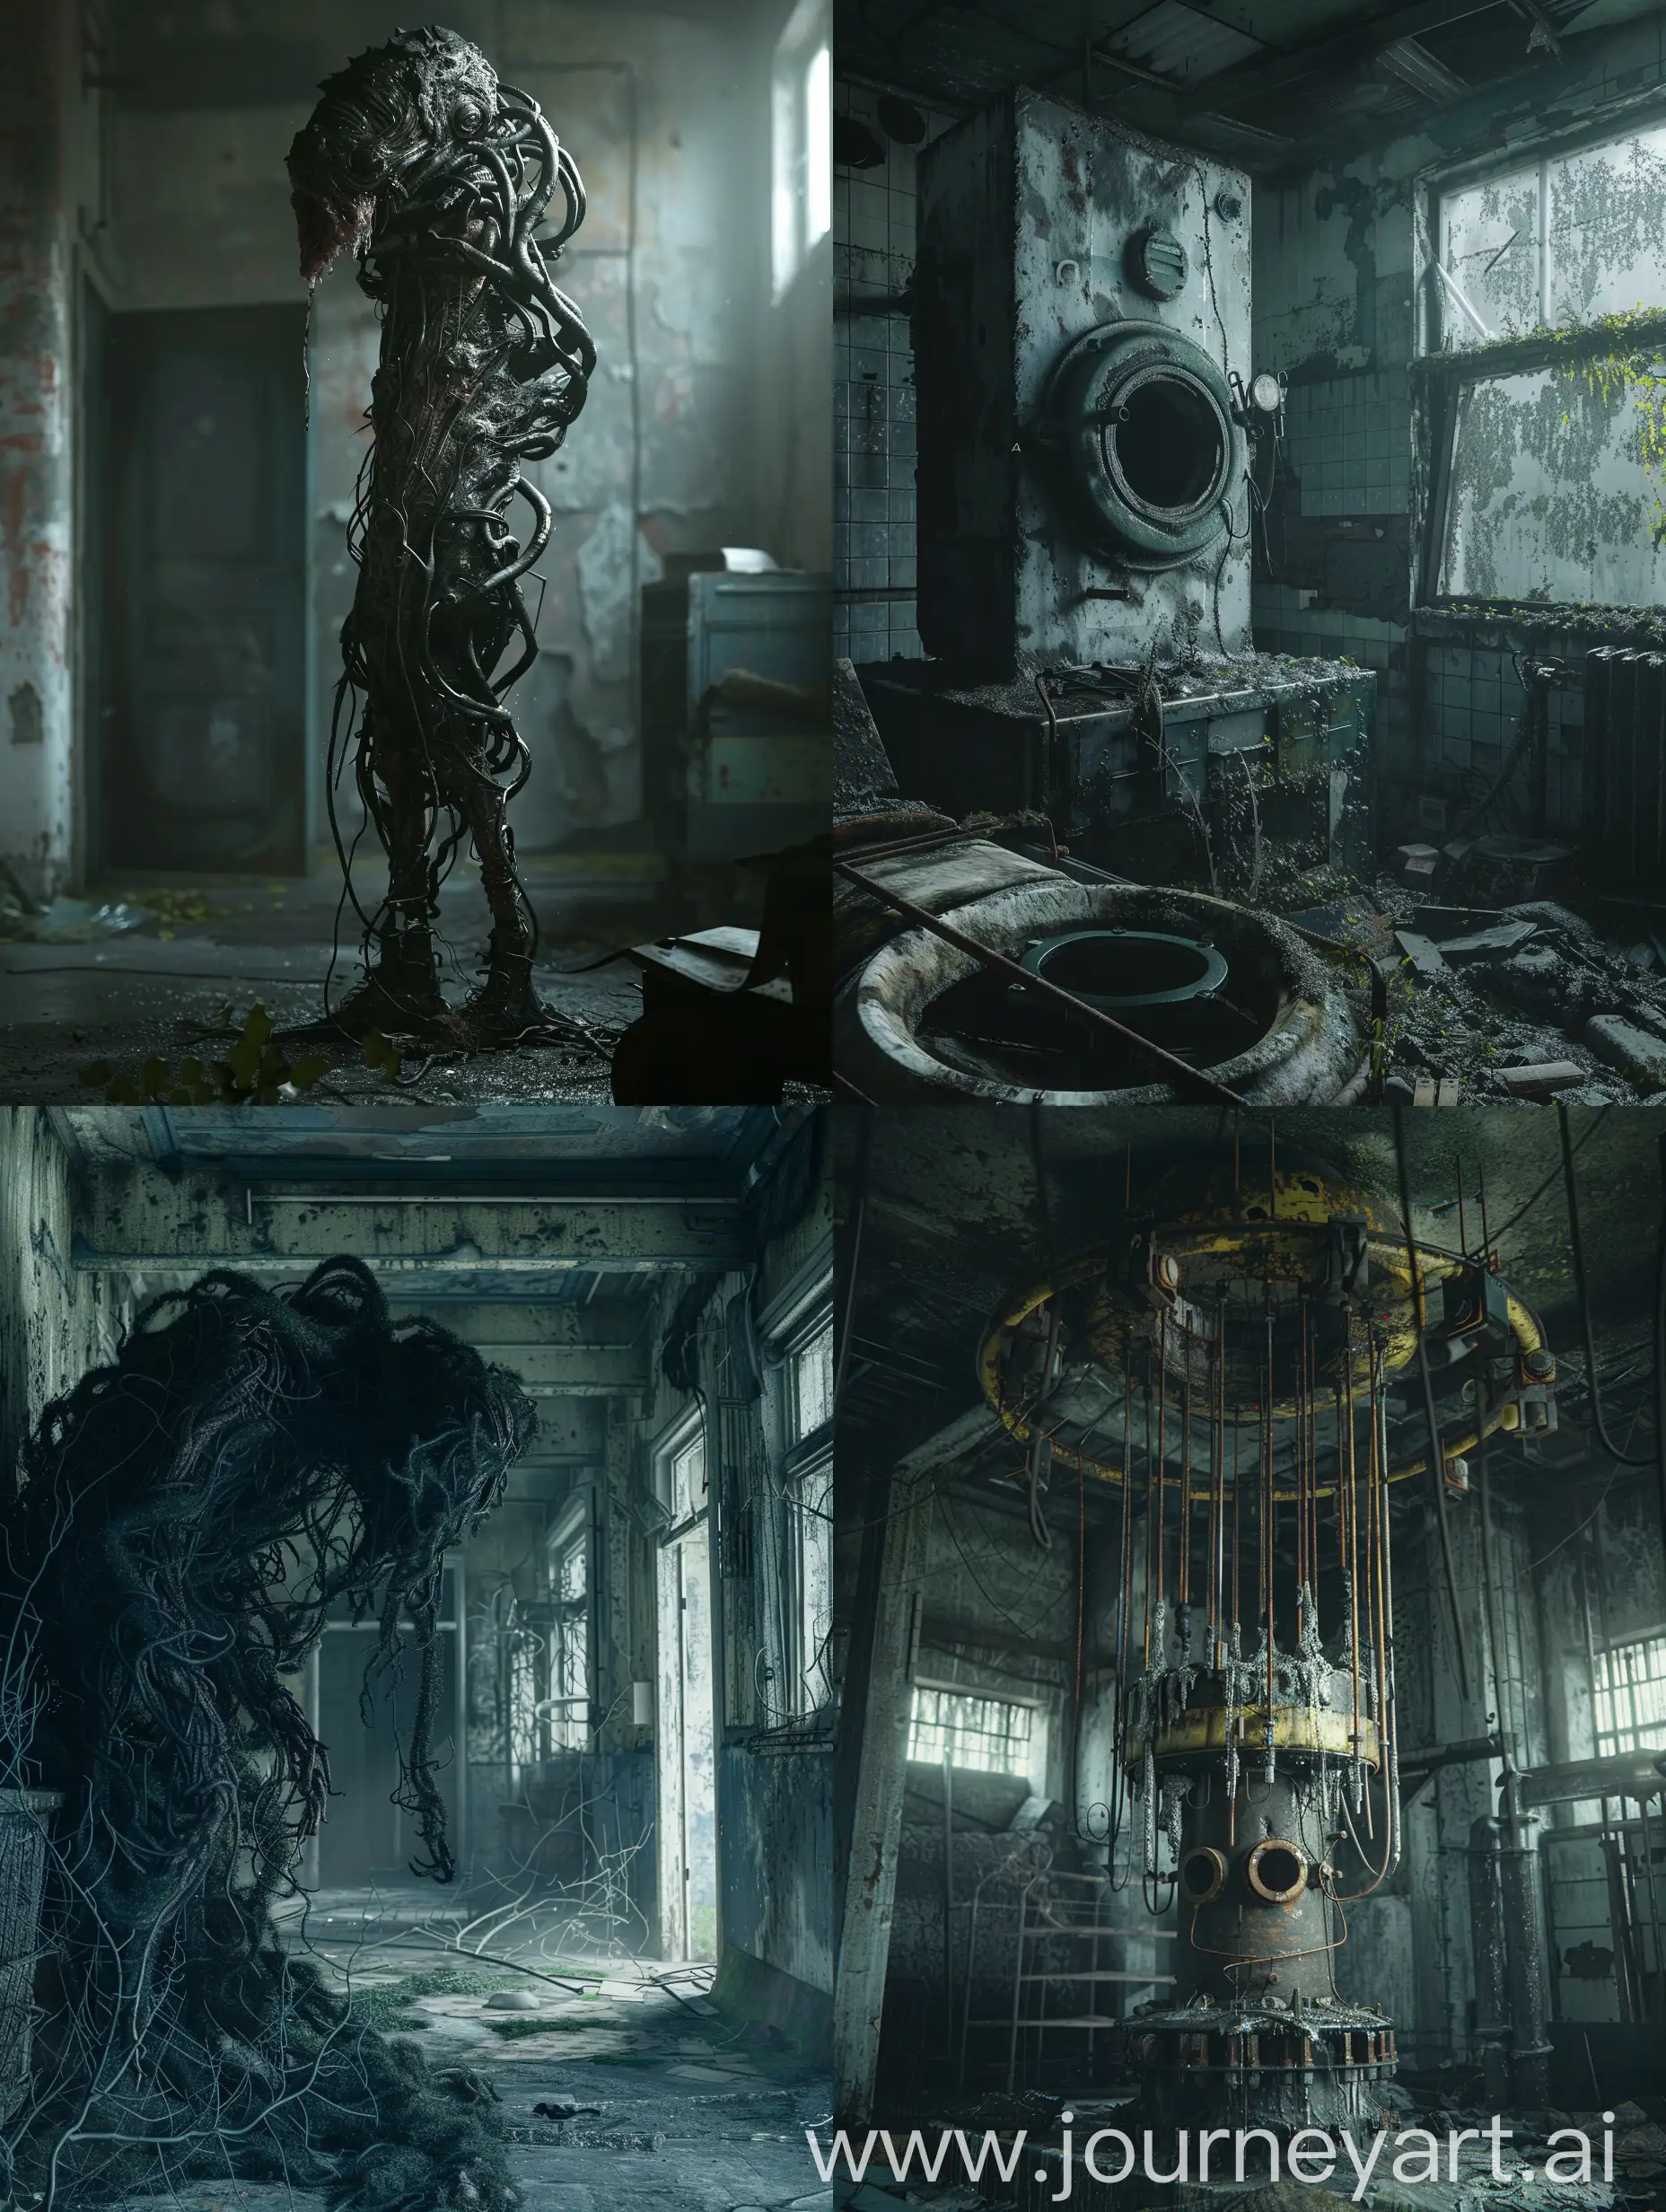 Chernobyl-Horror-Story-Film-Still-Dark-Twisted-and-Eerie-4K-Image-with-Intricate-Details